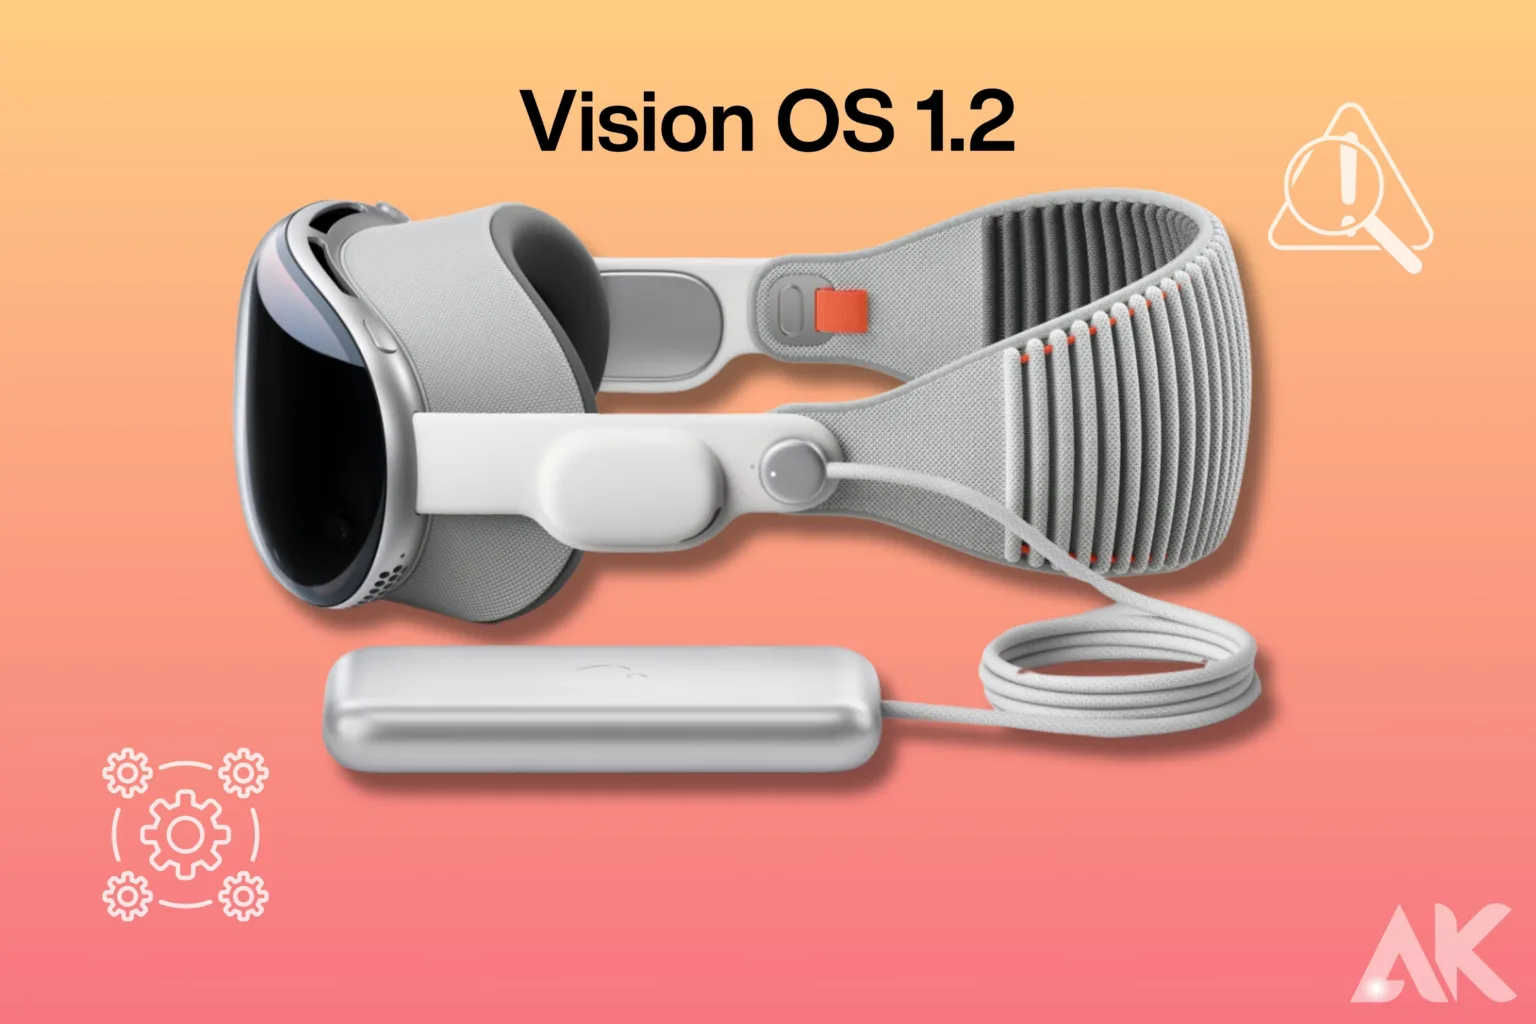 Vision OS 1.2 compatibility